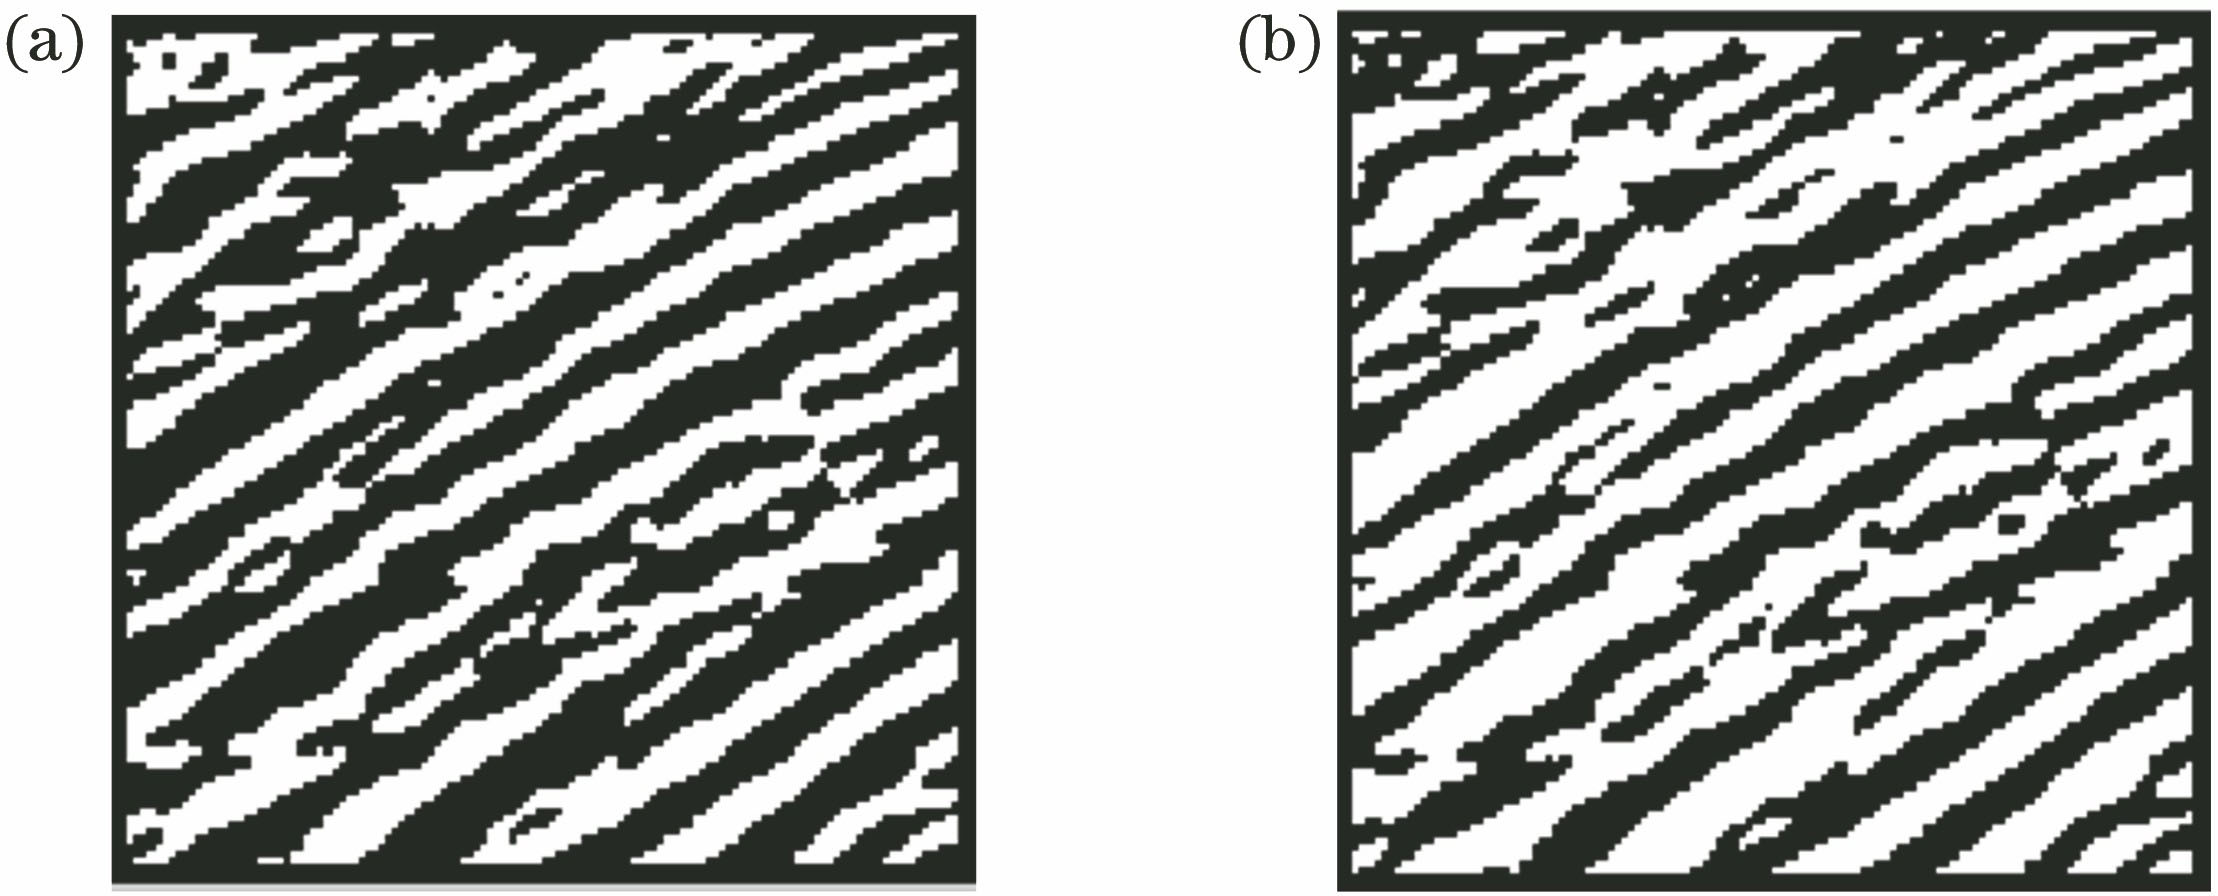 Using K-means clustering to segment seismic signals with noise in different regions. (a) Region I; (b) region II